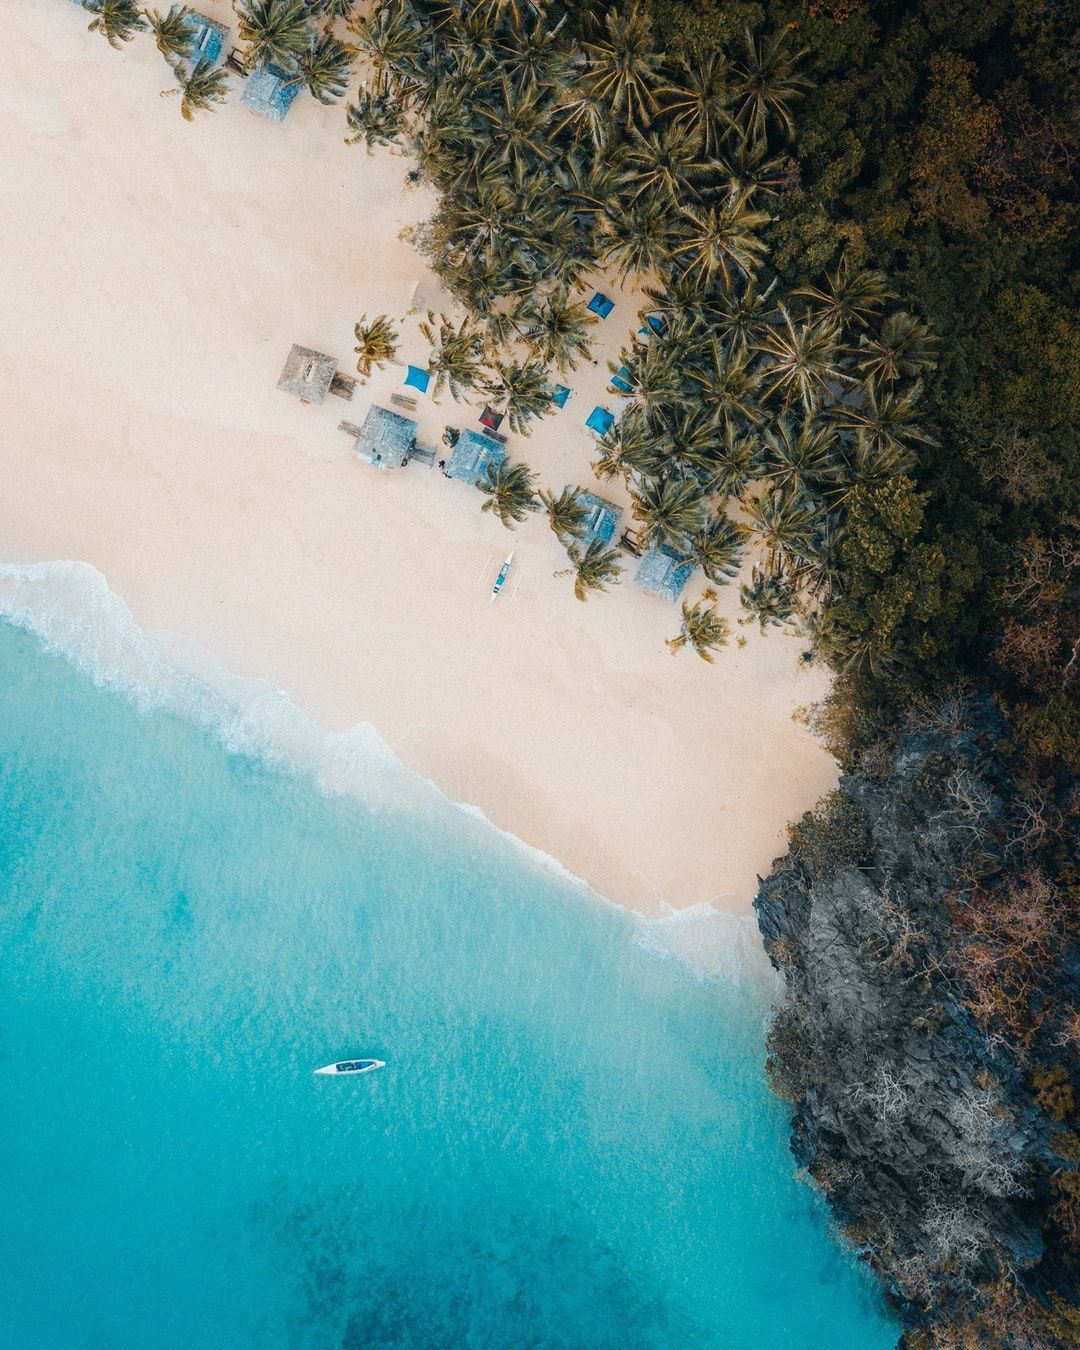 A secluded beach in the Philippines photo by Justin Kauffman. Aerial view, Wallpaper iphone summer, Aerial